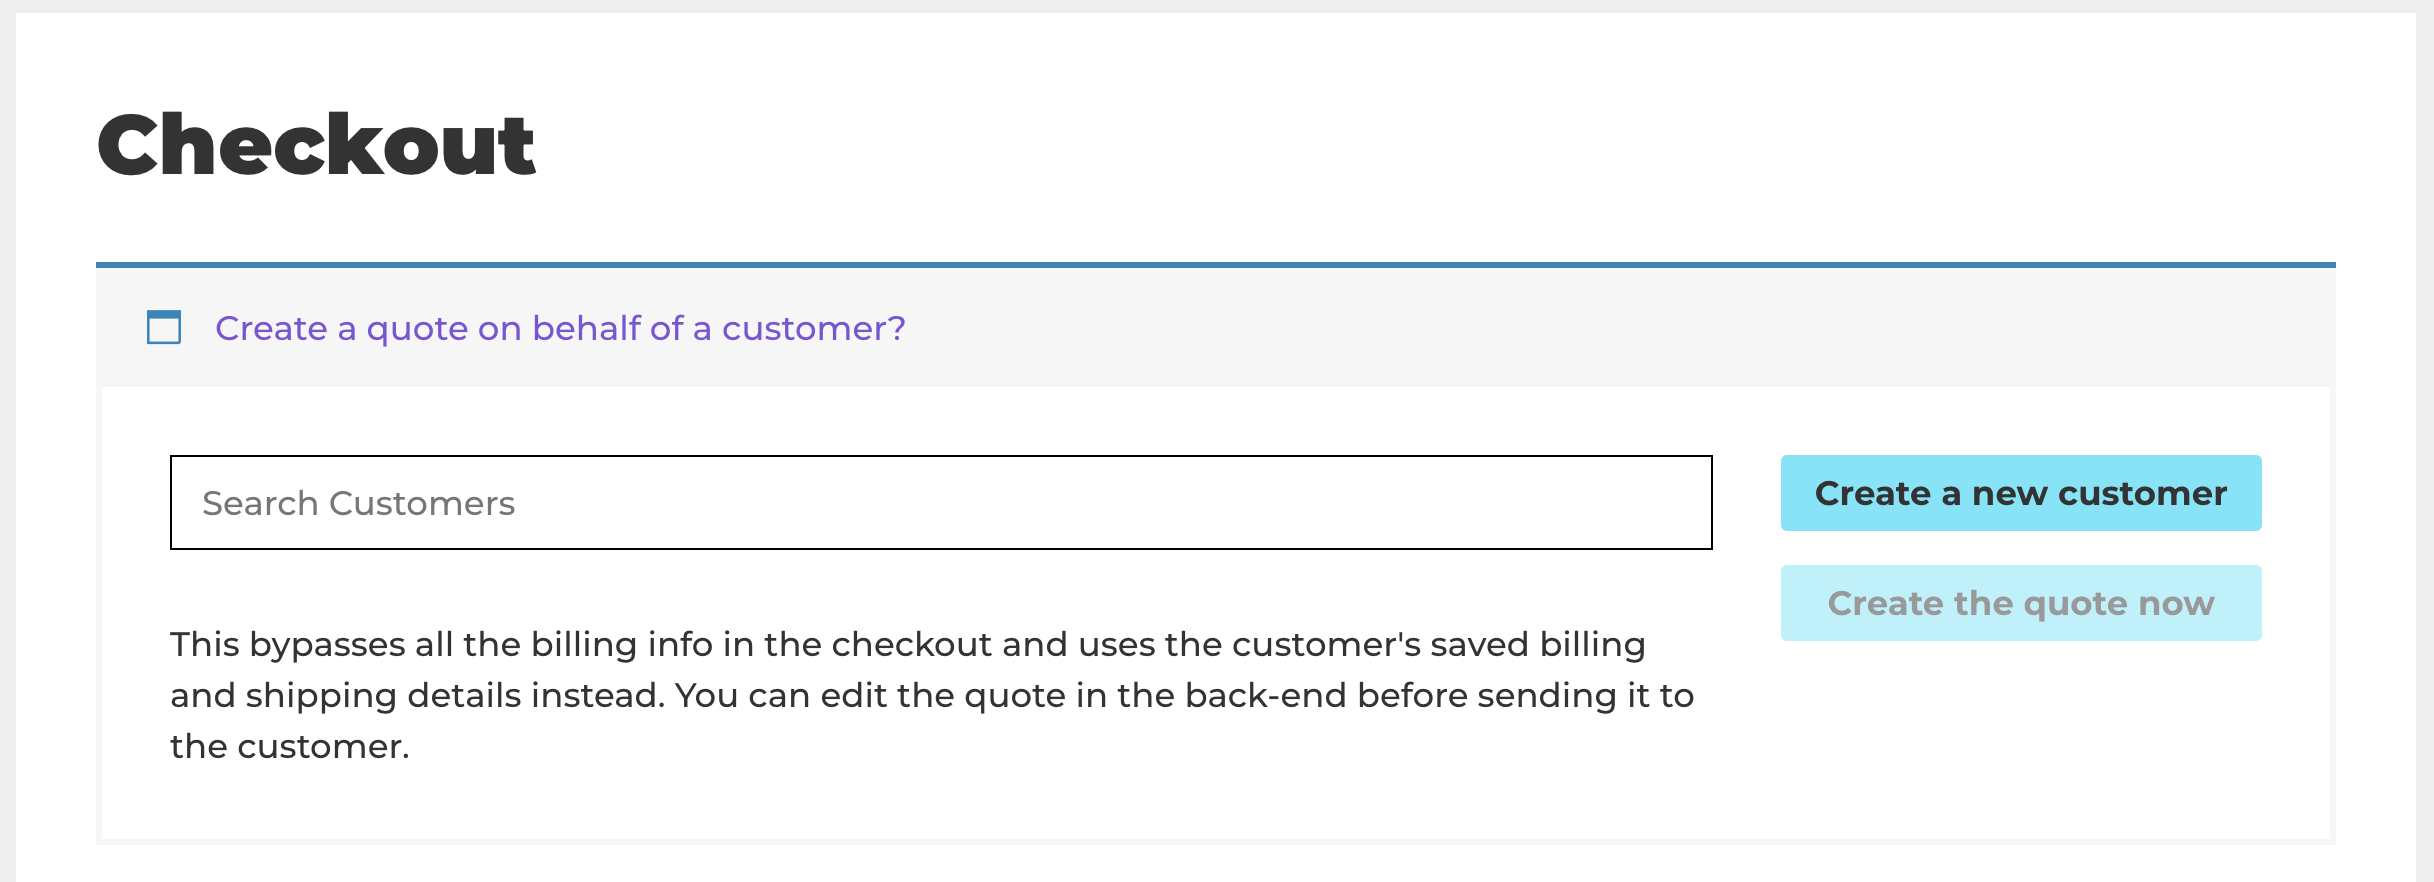 Creating a quote on behalf of a customer in WooCommerce